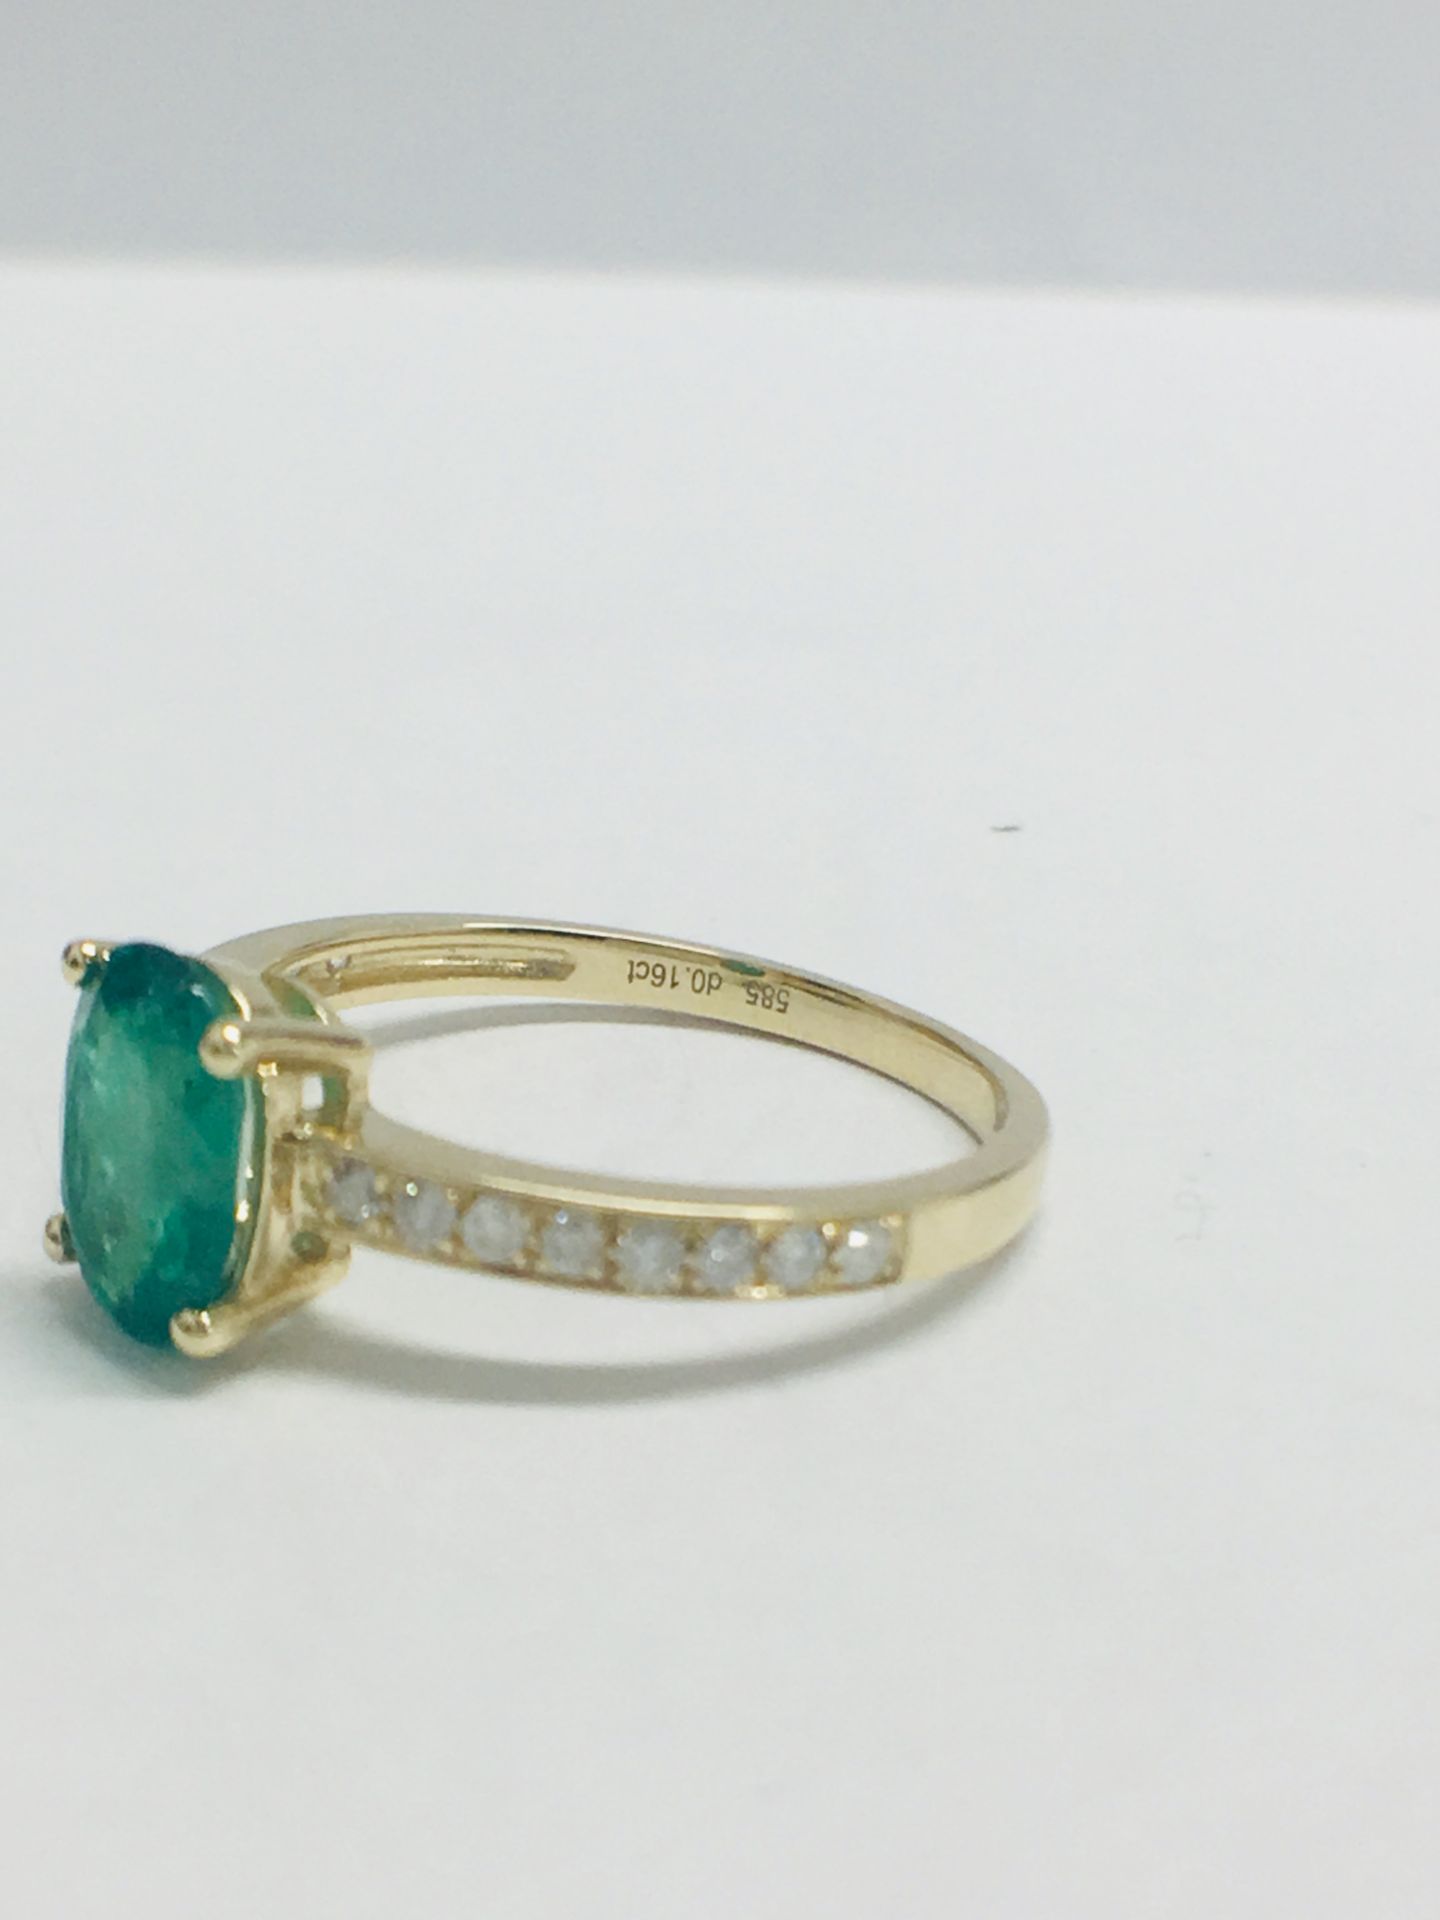 14ct Yellow Gold Emerald and Diamond Ring - Image 6 of 7